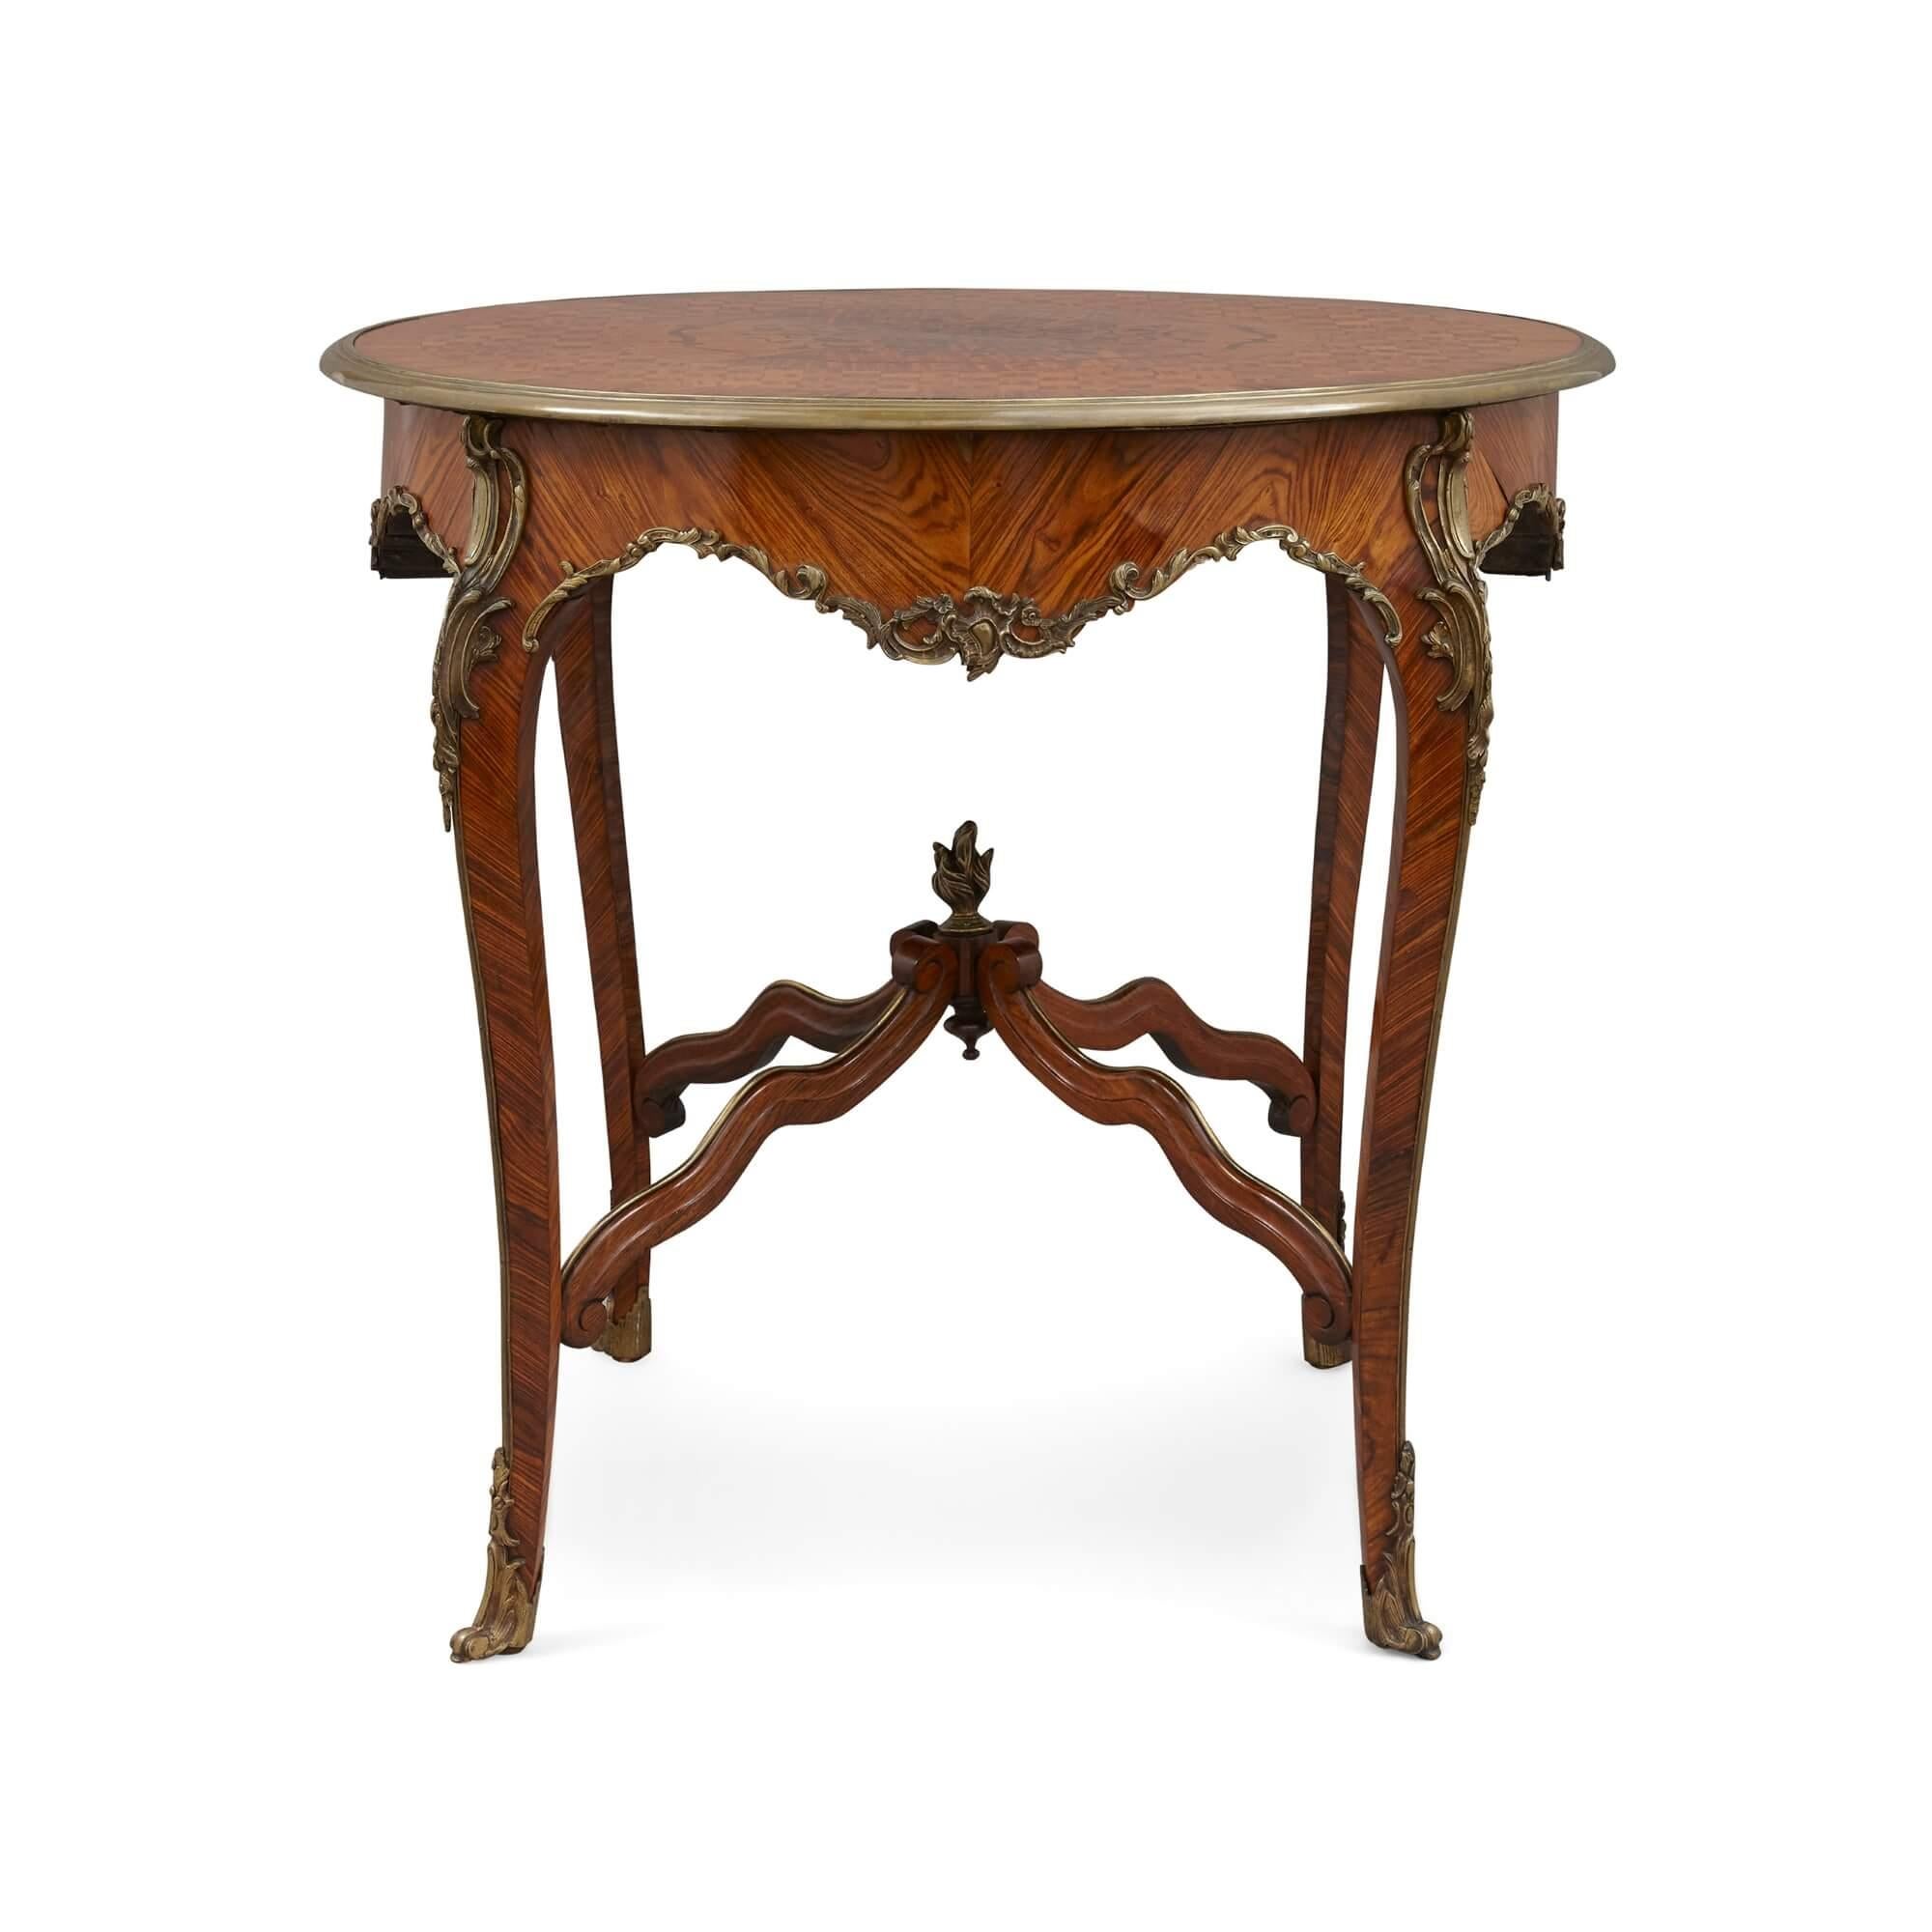 Louis XV style gilt bronze and parquetry circular centre table
French, 19th Century,
Height 77cm, Diameter 85cm

Made in France in the 19th century, this excellent table is in the rich Louis XV style, and is replete with gilt-bronze mounts and